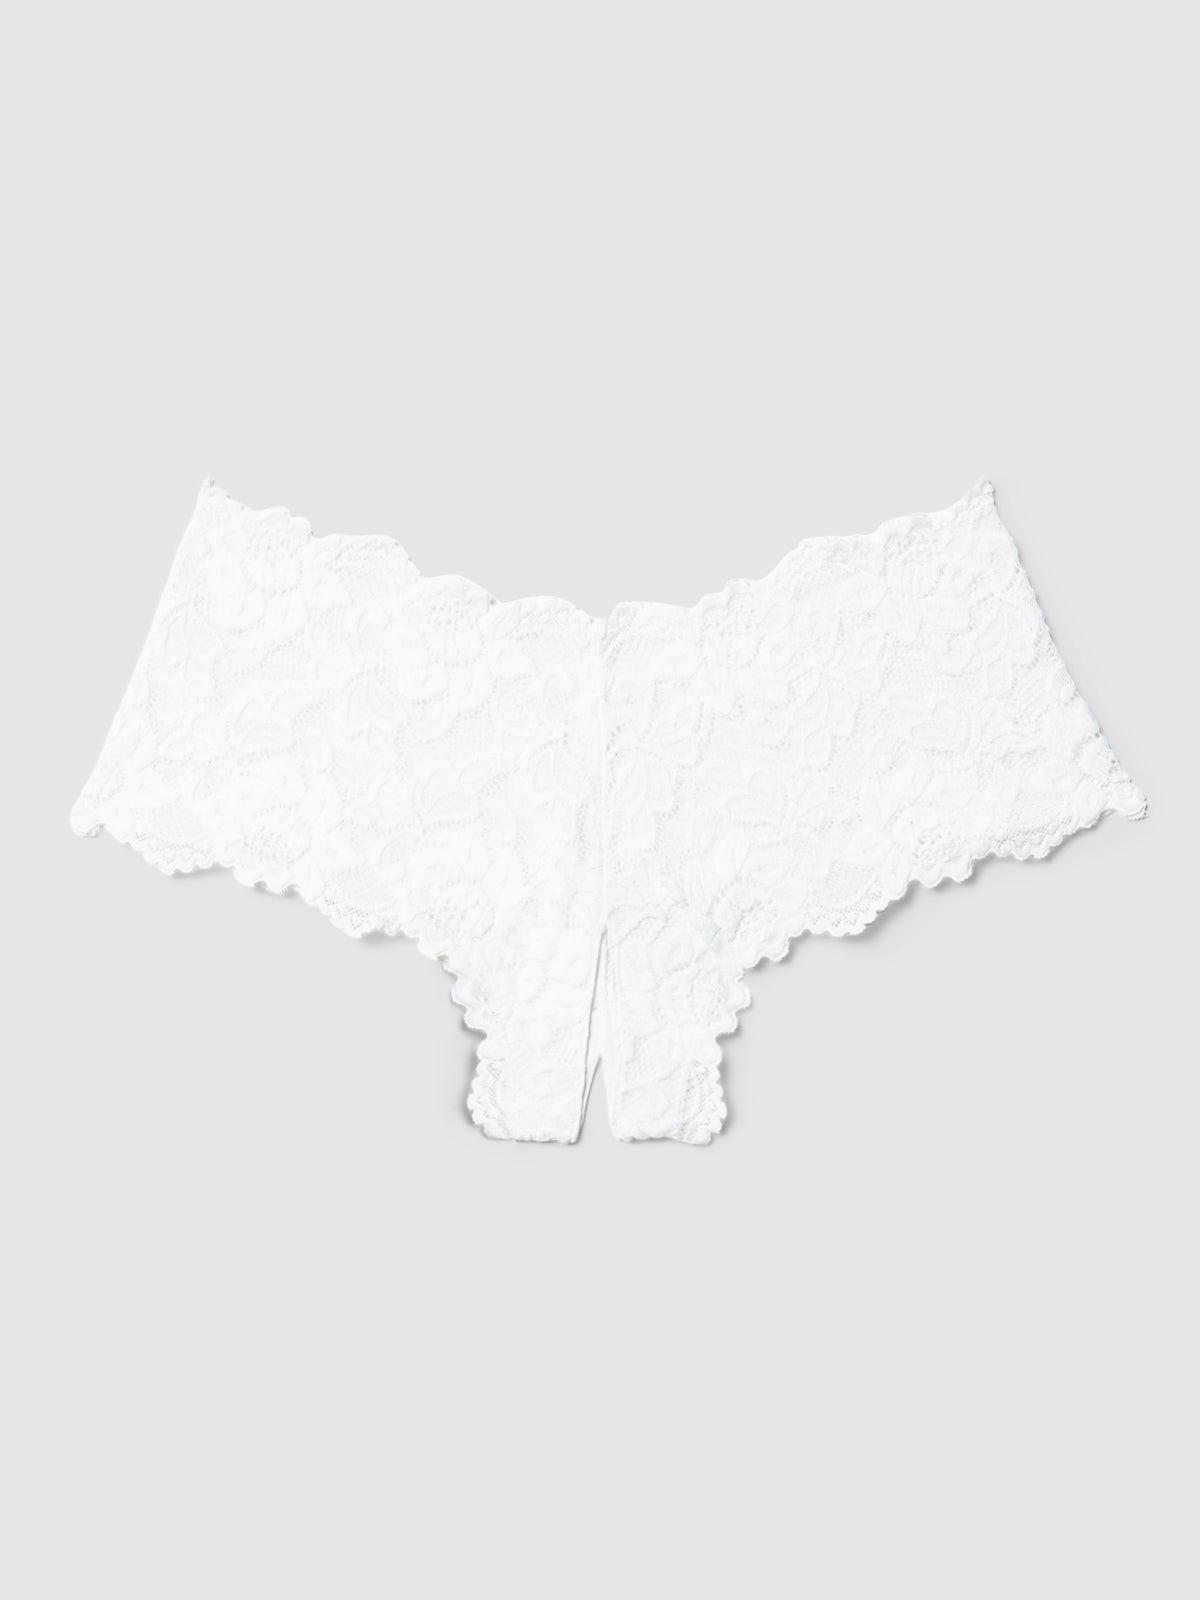 Jessica Lace Crotchless Cheeky in White by FREDERICK'S OF HOLLYWOOD